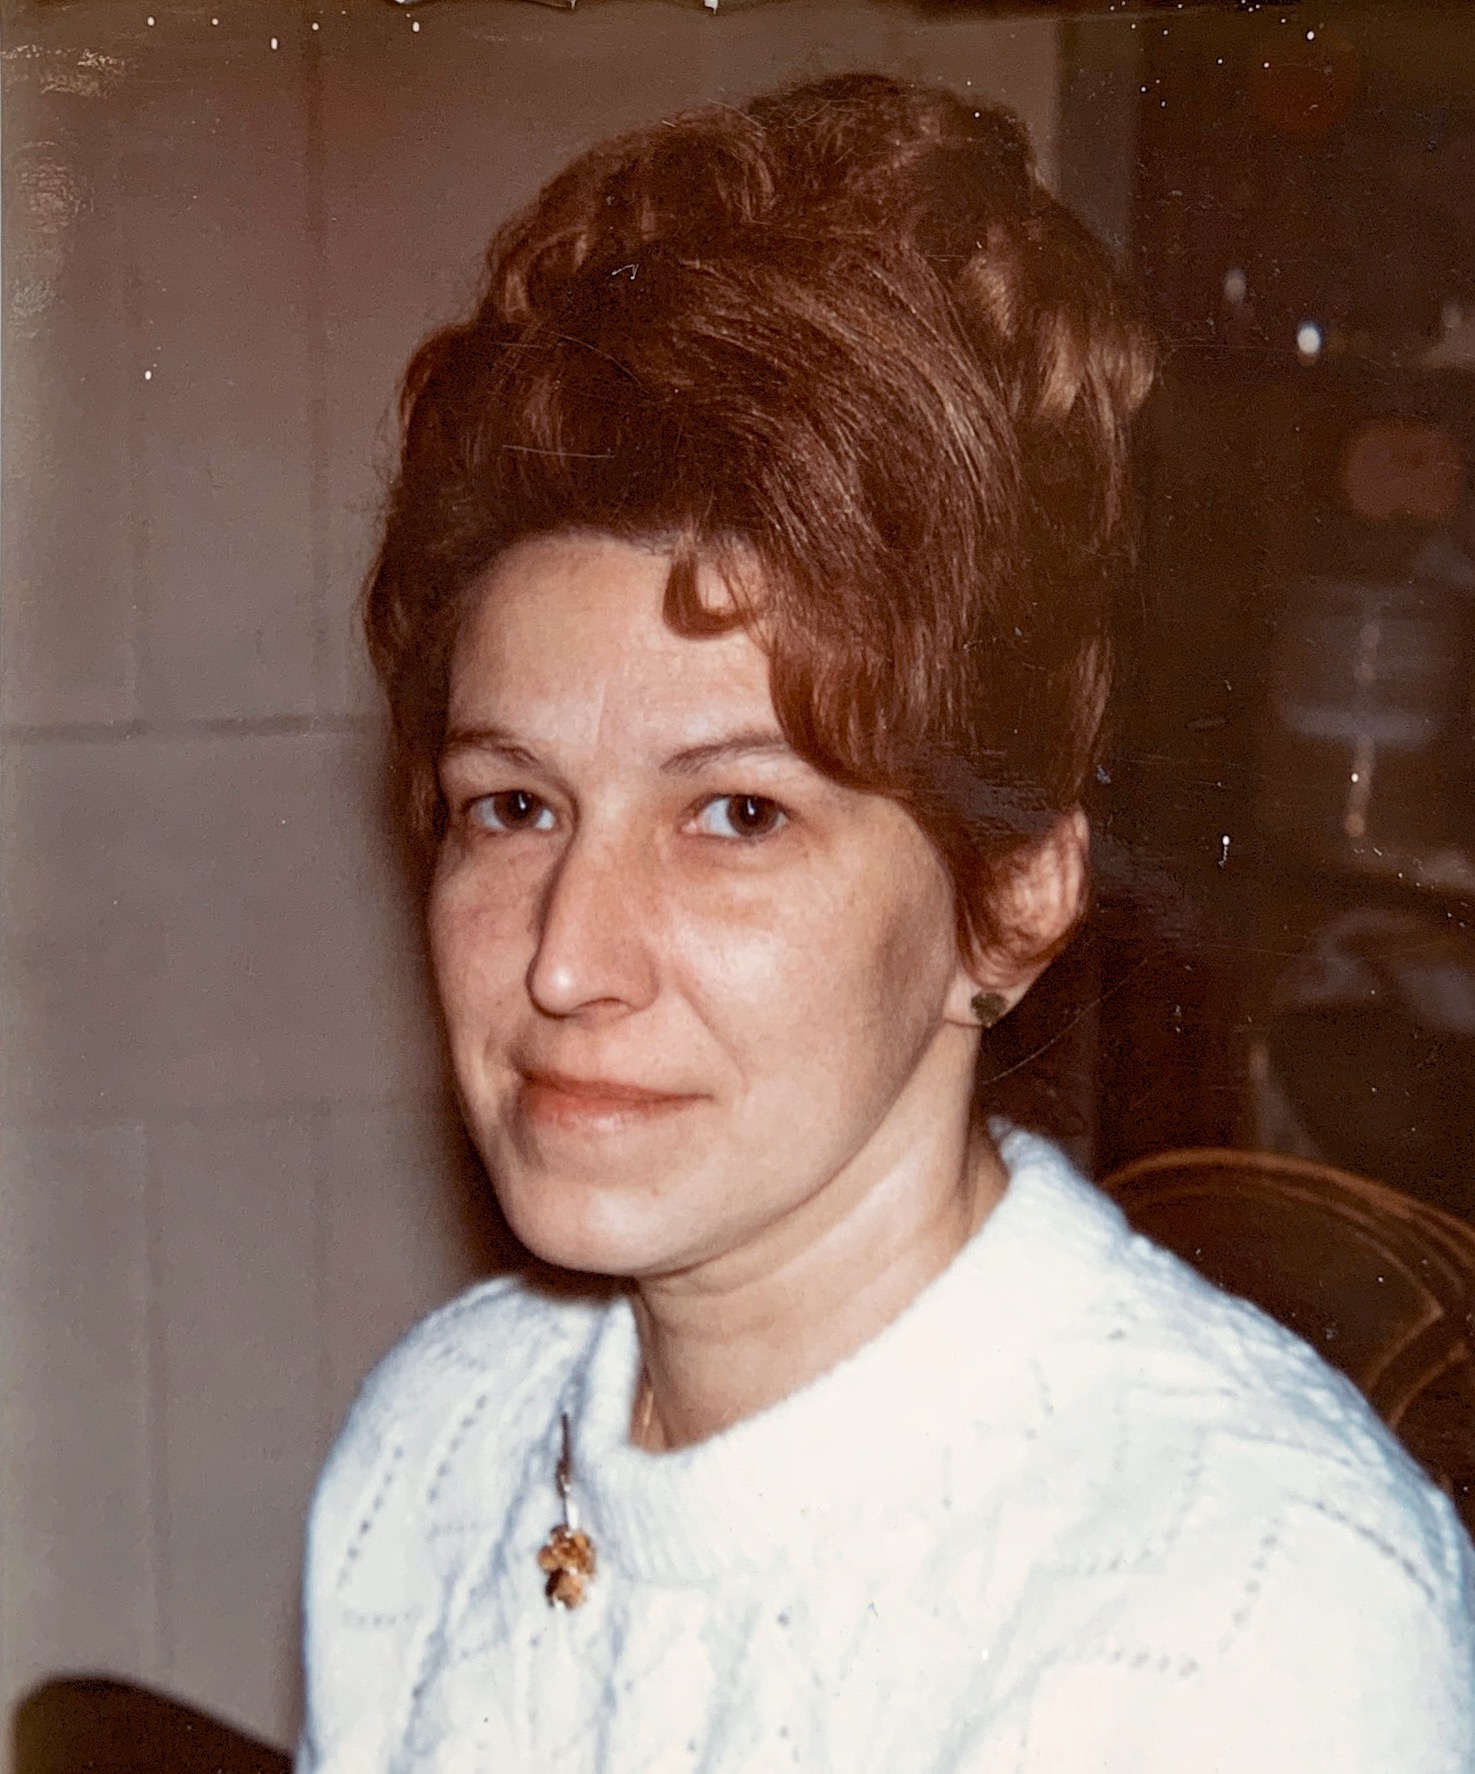 Mom c 1971 (34 years old)
